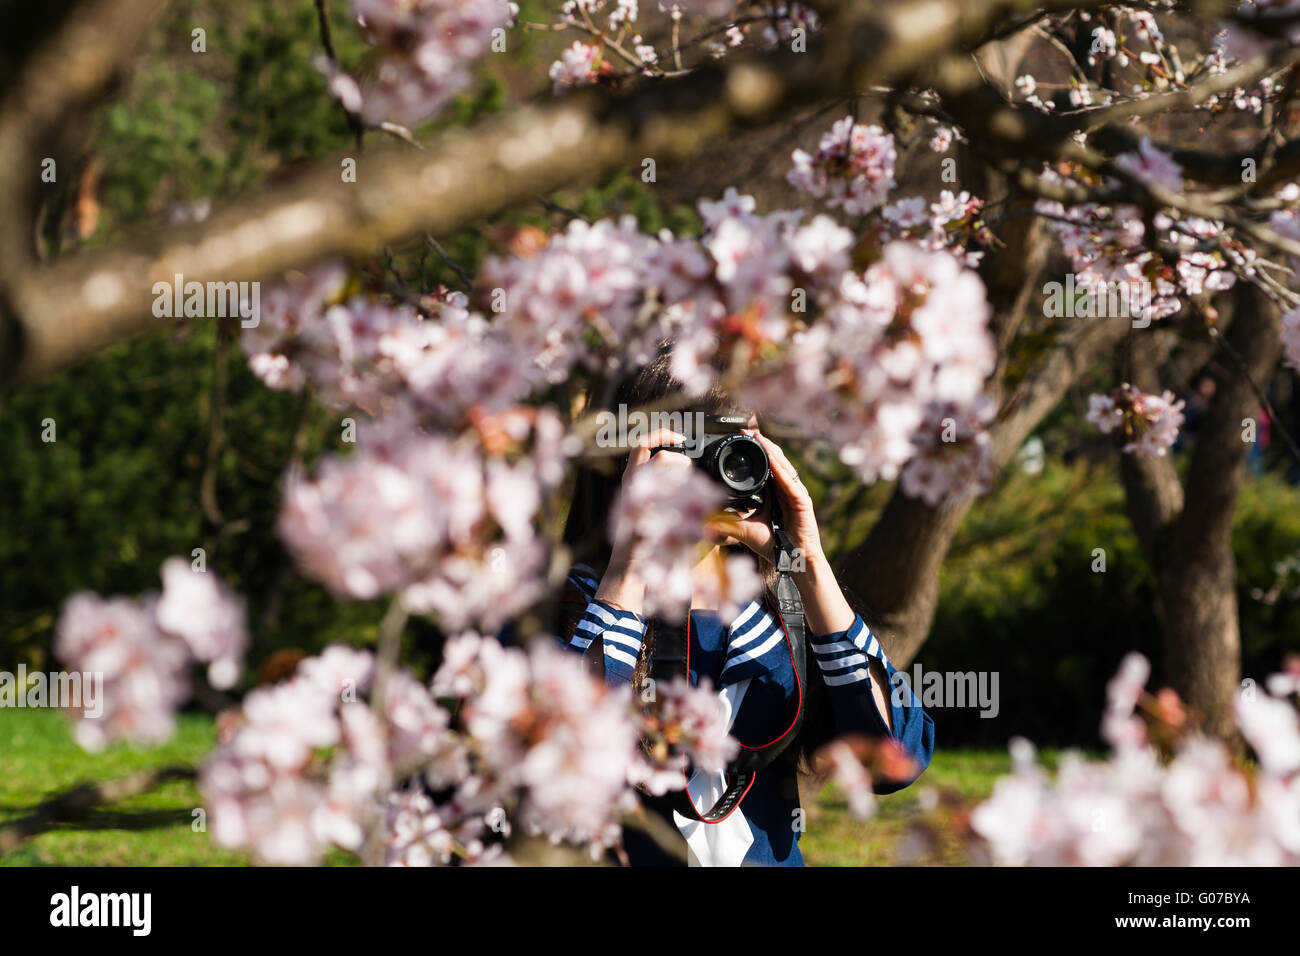 Moscow, Russia. April 30, 2016. Short hanami season - the festival of viewing of sakura - Japanese cherry and plum trees - in full bloom started in Moscow, Russia on the last days of April, 2016. Many people, including families with small kids visit the Japanese Garden of the Main Botanical Garden of the Russian Academy Of Sciences to feel the joy of spring and the unity with Nature. Unidentified people take photos and have fun in the garden. Credit:  Alex's Pictures/Alamy Live News Stock Photo